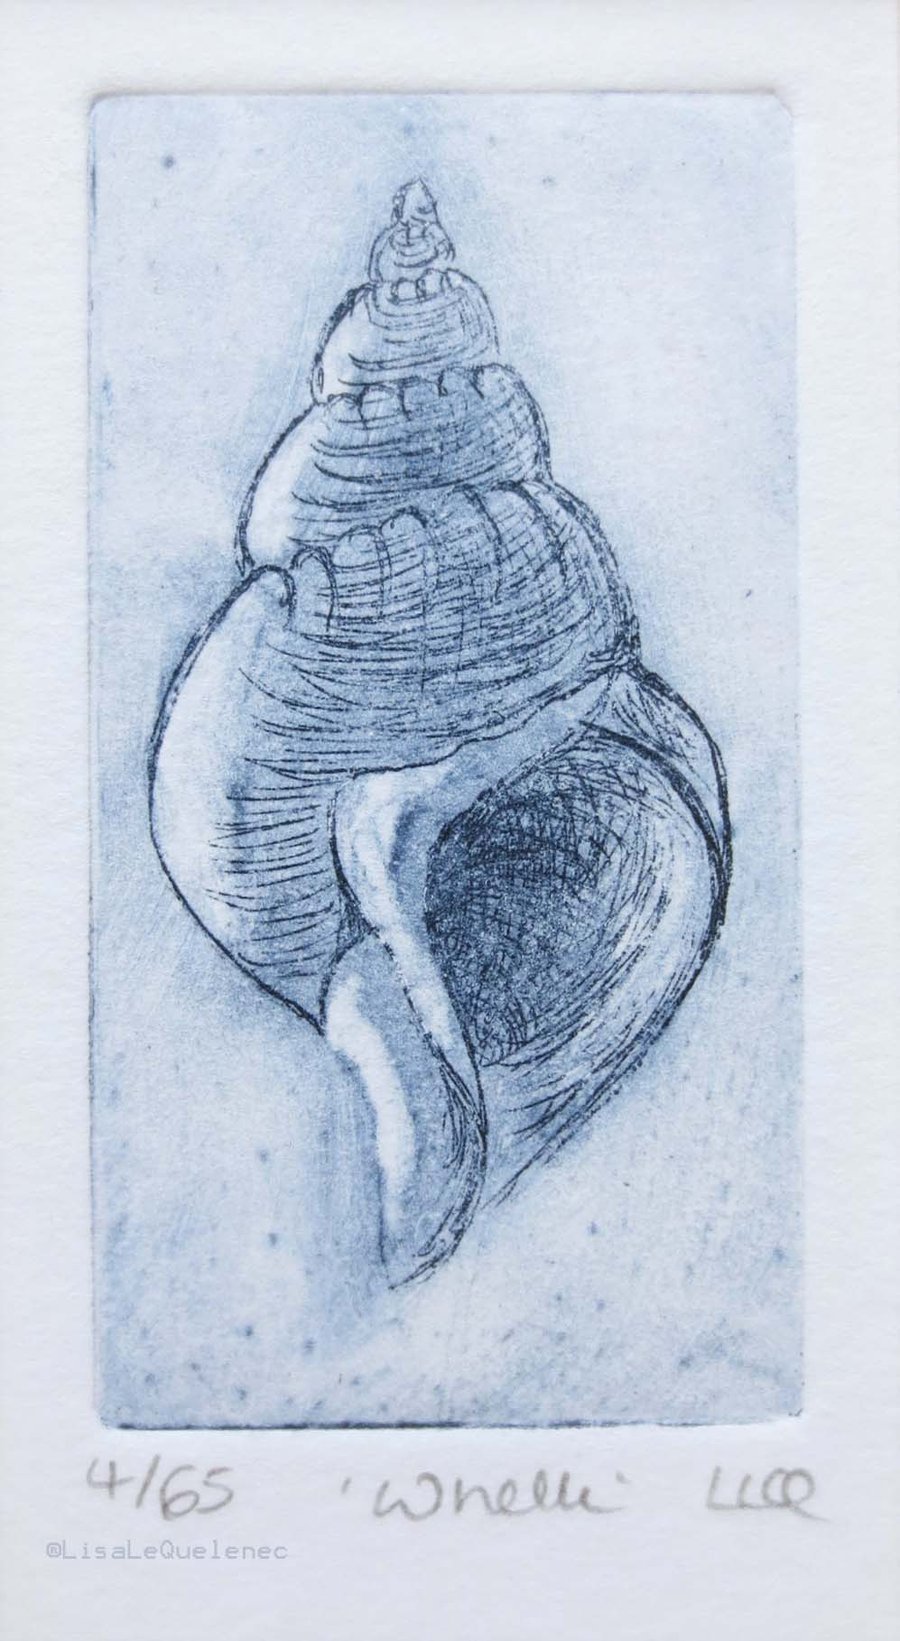 Original etching of a whelk seashell no. 4 of 65 in a limited edition